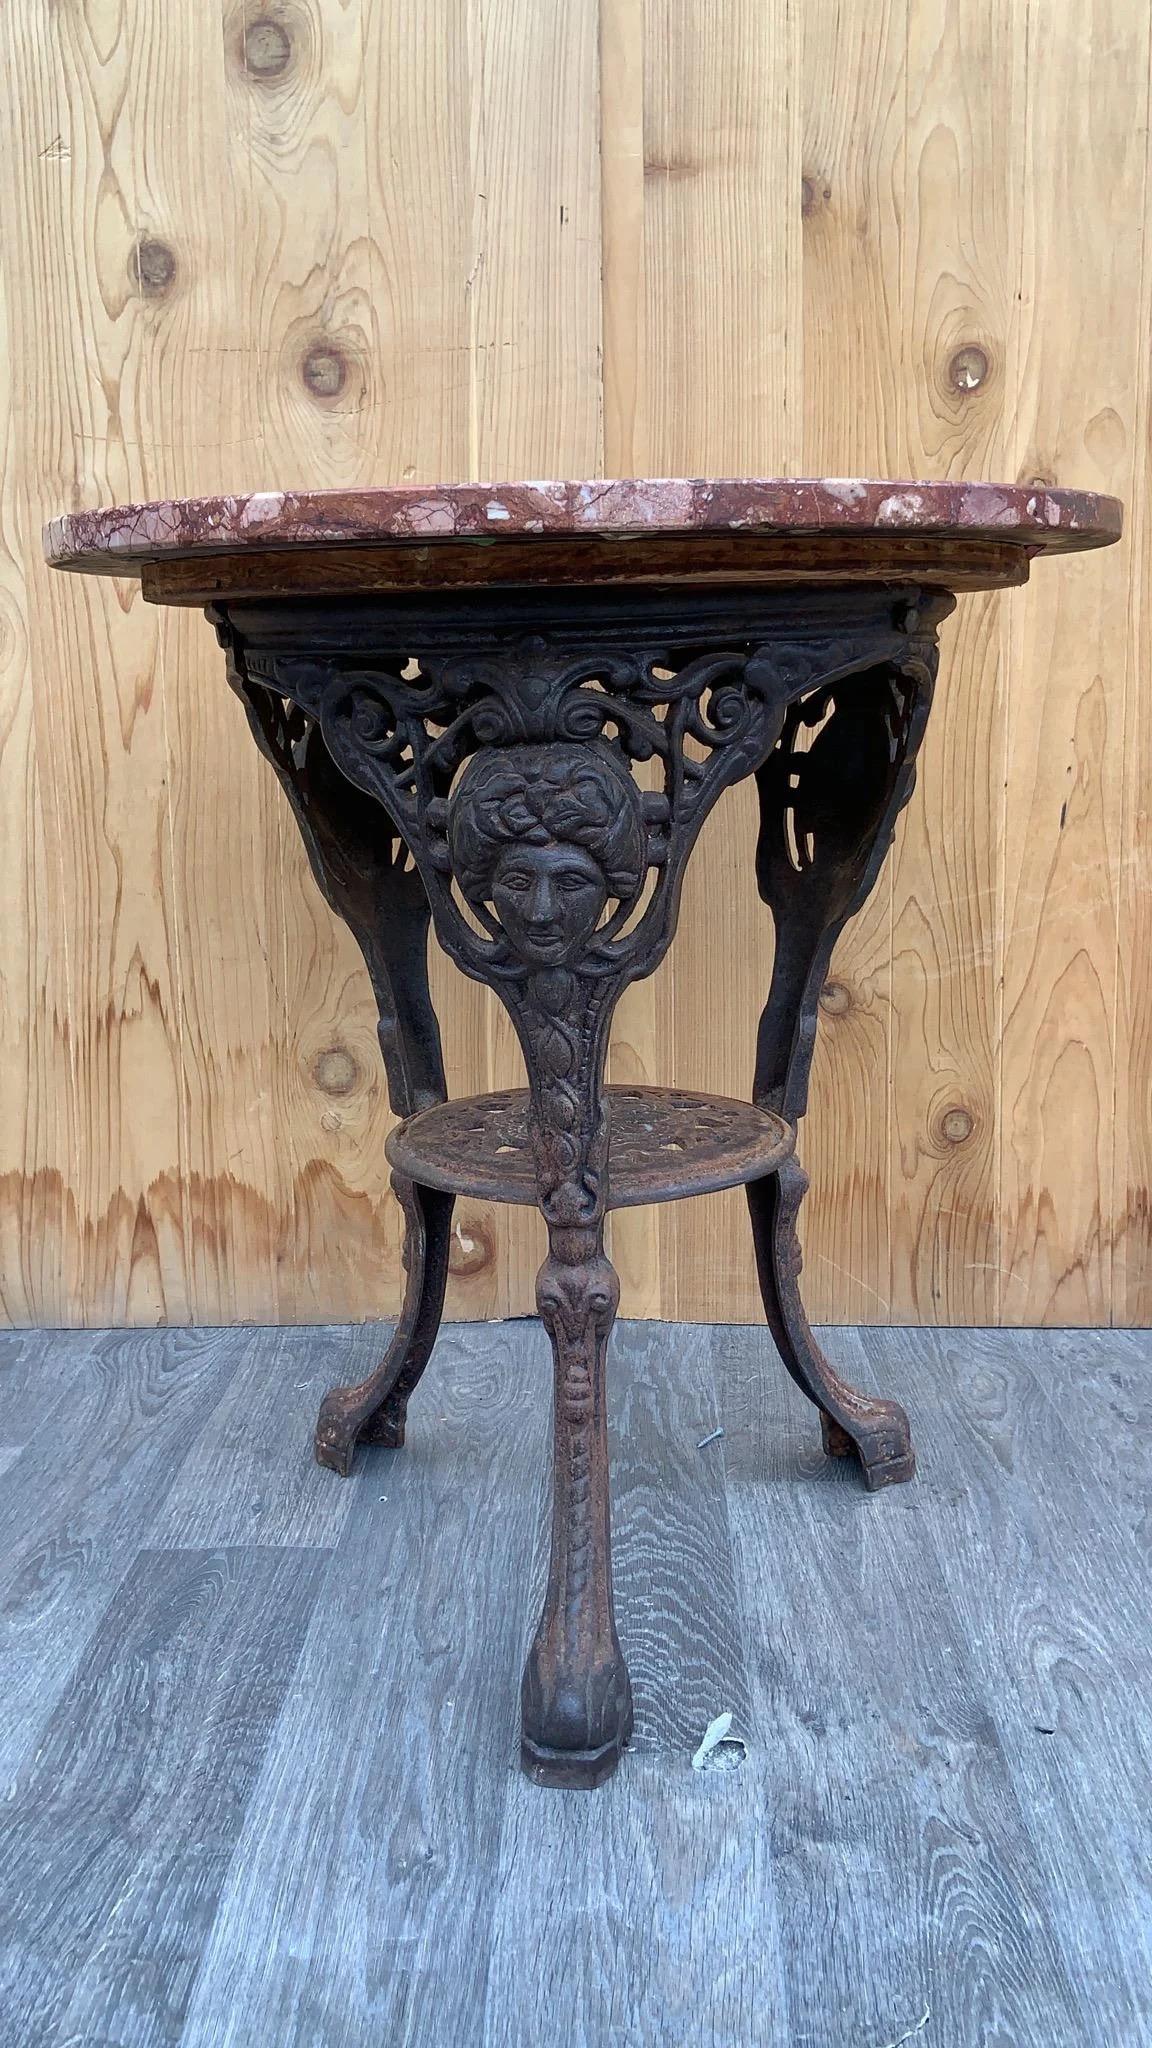 Neoclassical Revival Antique Neoclassical Cast Iron Marble Top English Pub Table For Sale